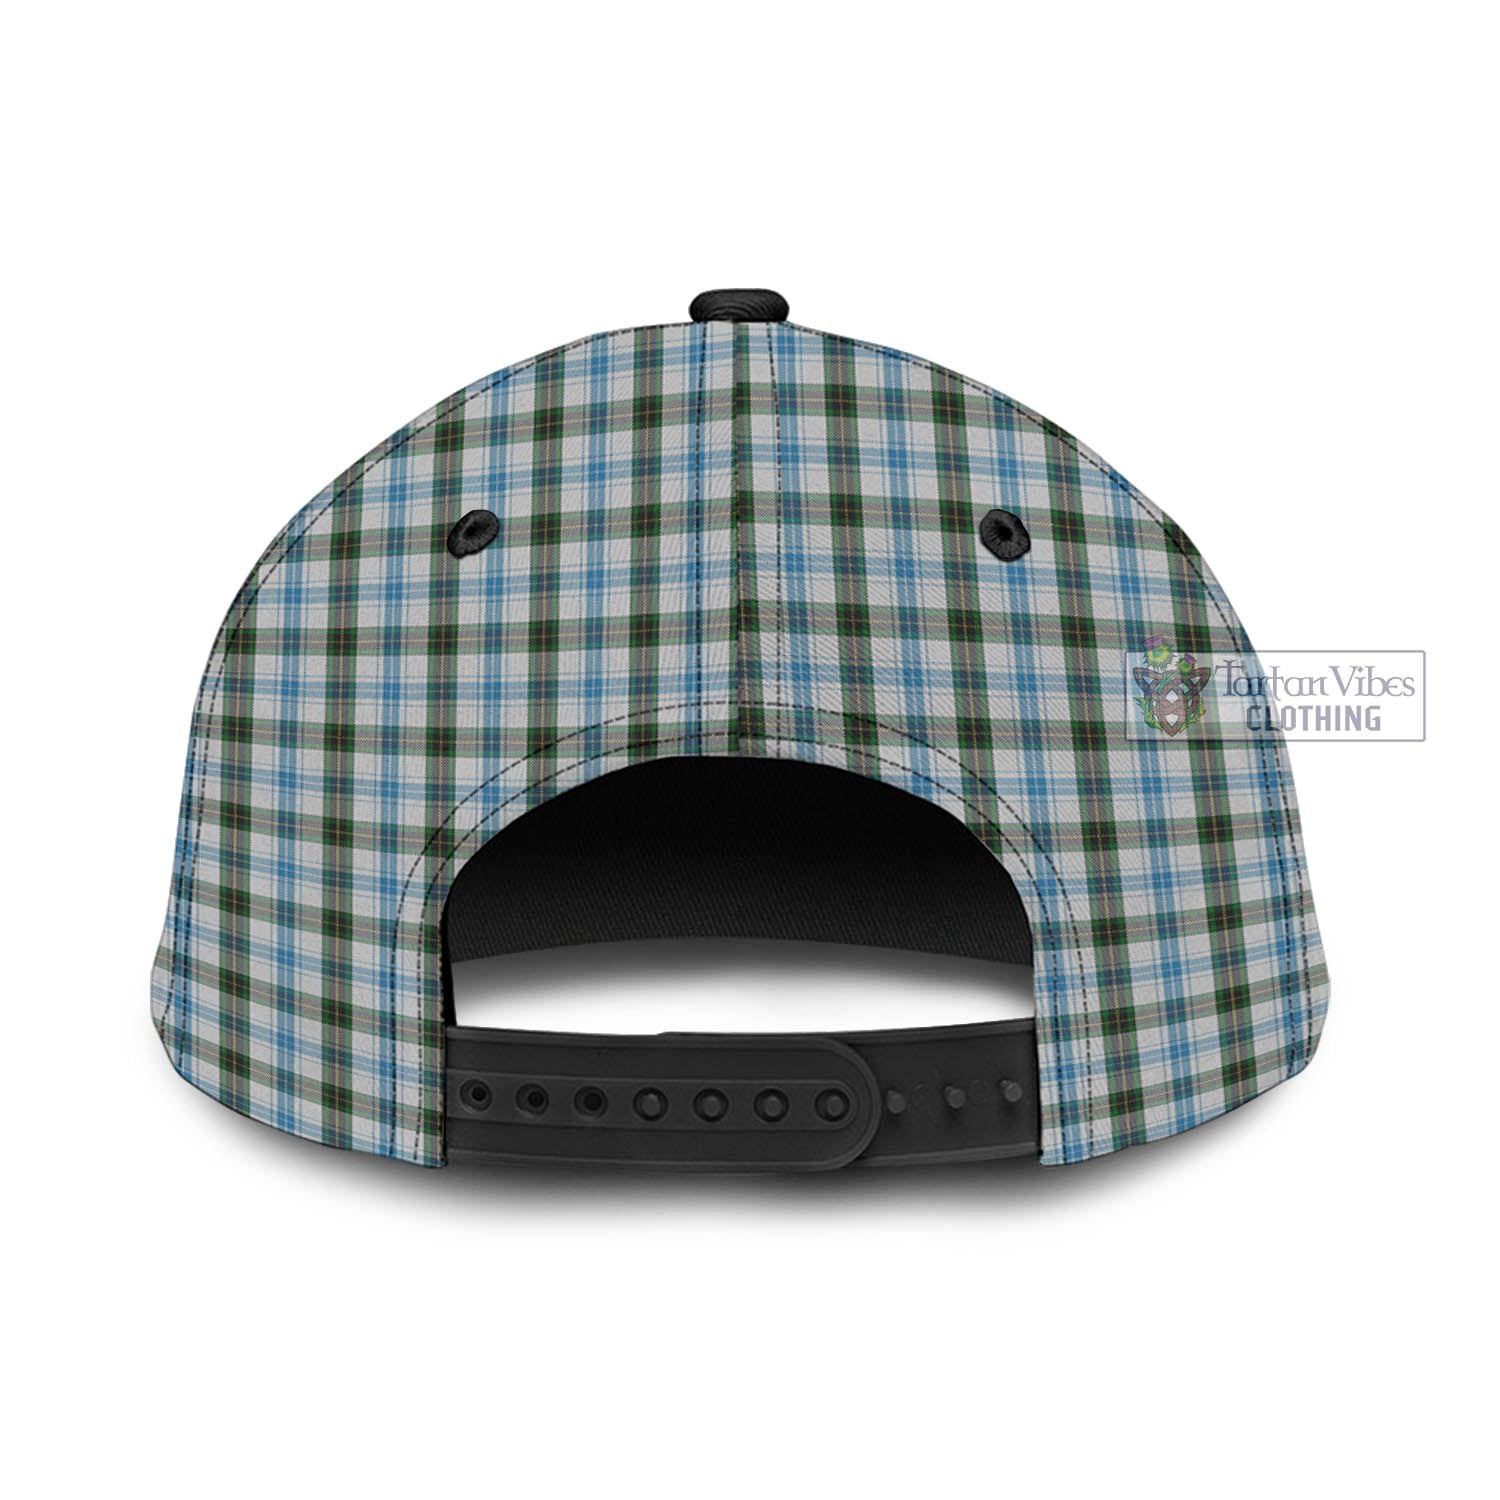 Tartan Vibes Clothing Henderson Dress Tartan Classic Cap with Family Crest In Me Style